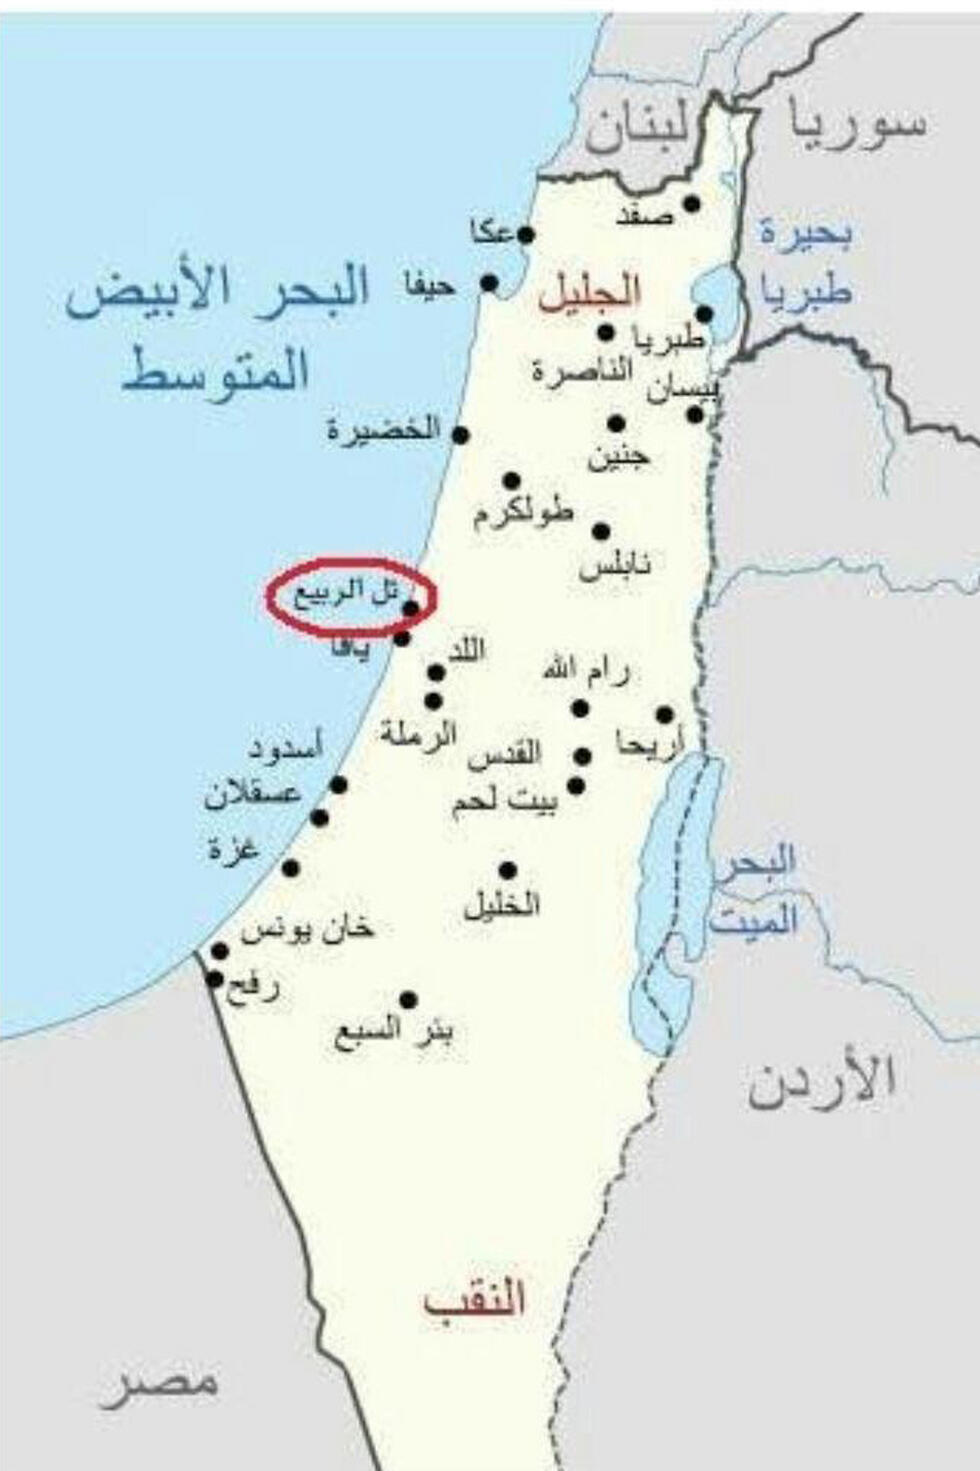 Map of 'Palestine' found in textbooks 